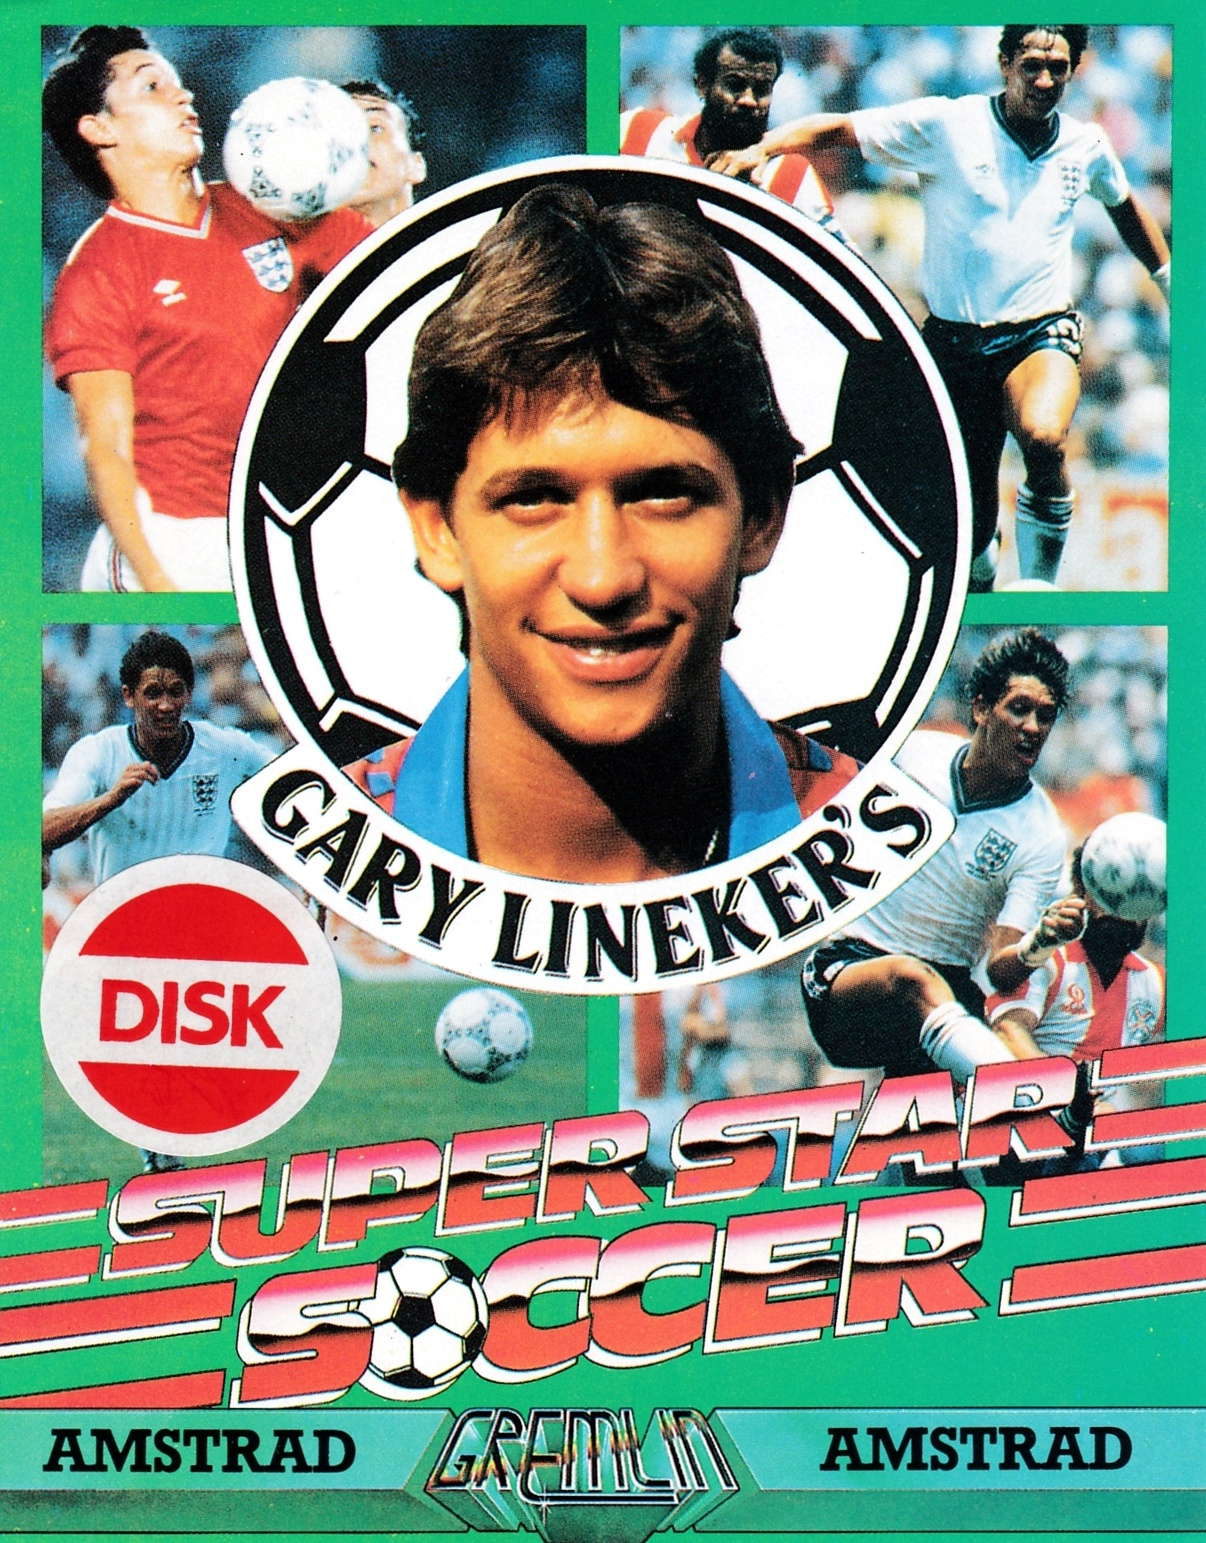 cover of the Amstrad CPC game Gary Lineker's Superstar Soccer  by GameBase CPC